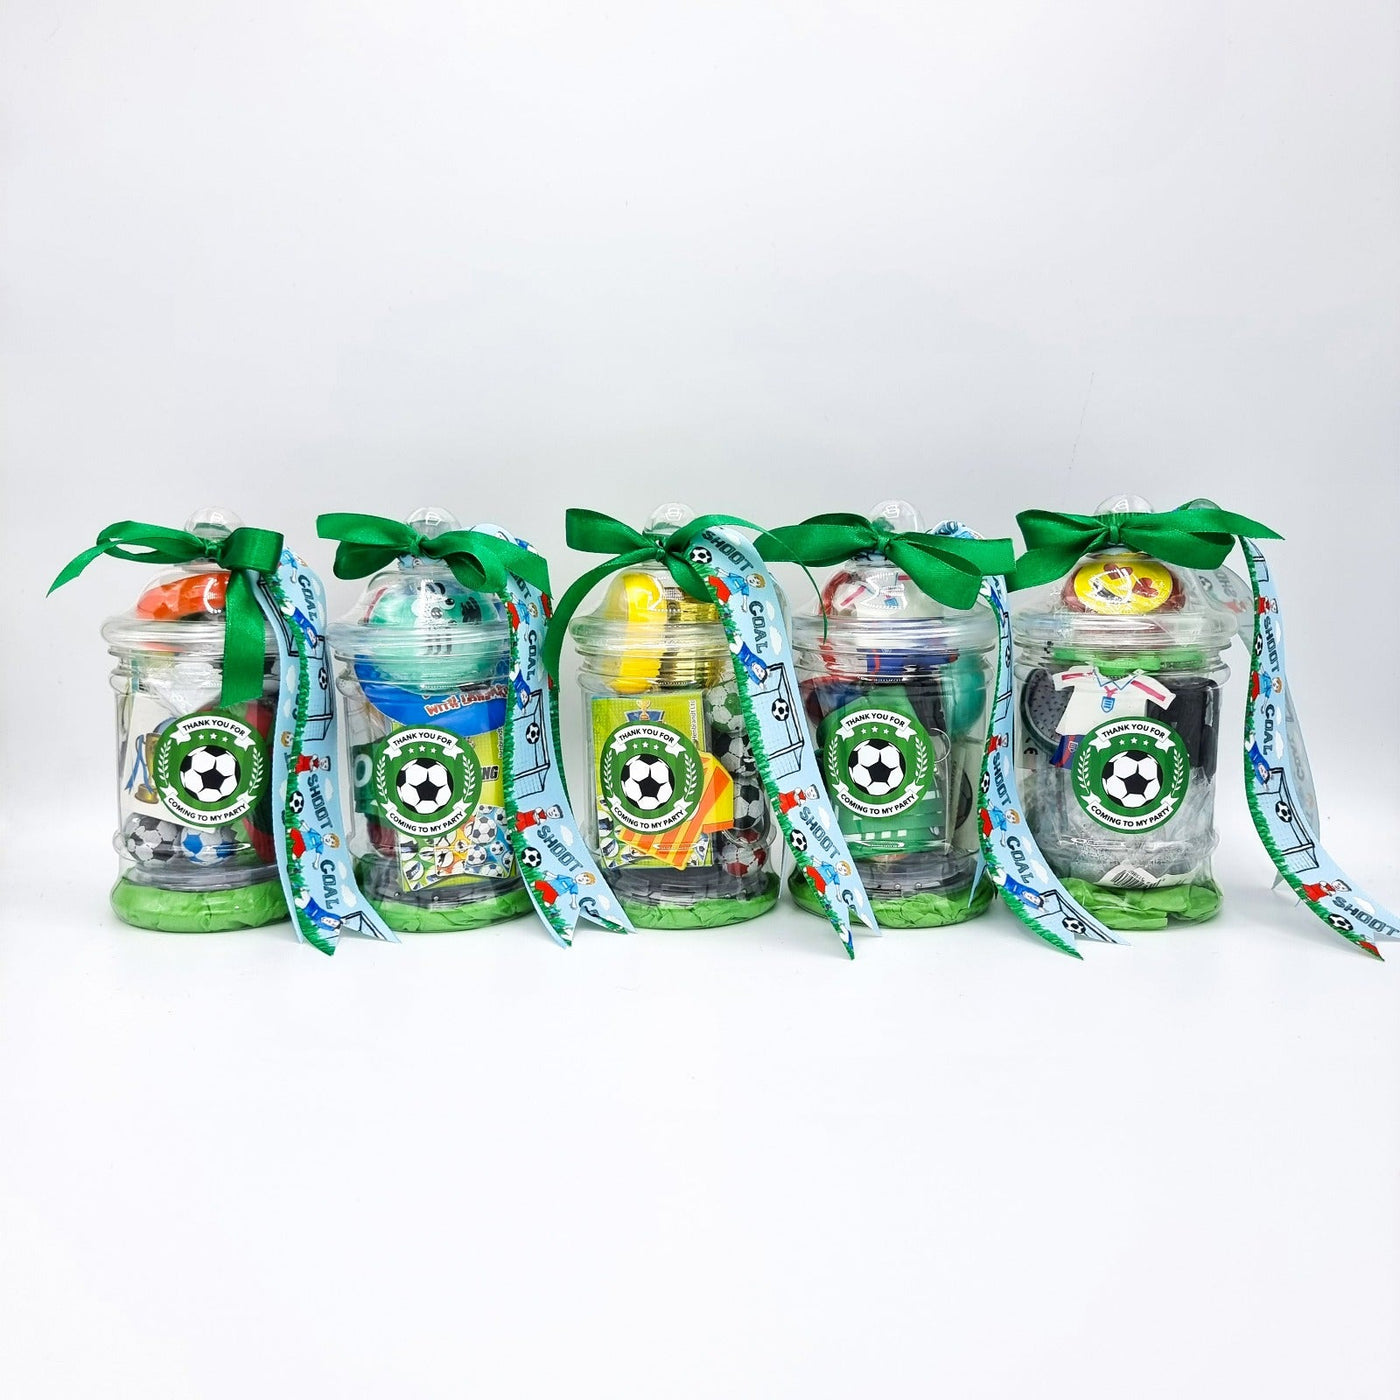 Pre-filled Children's Party Football Goody Bags In Mini Vintage Jars With Sweets And Toys, Party Favours.